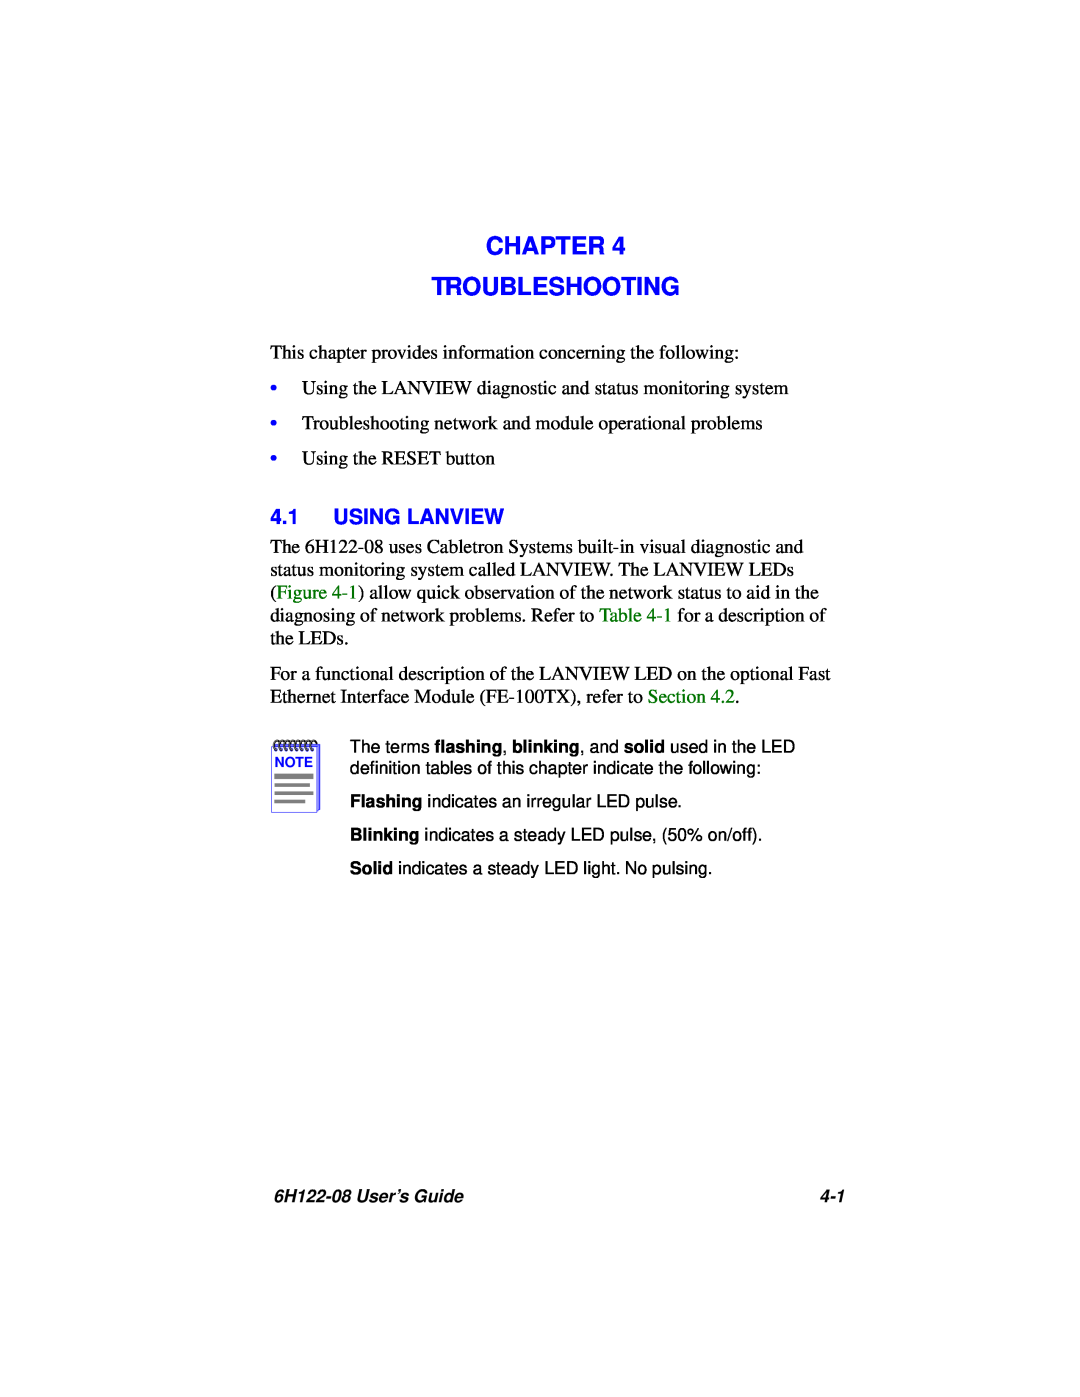 Cabletron Systems 6H122-08 manual Chapter Troubleshooting, Using Lanview 